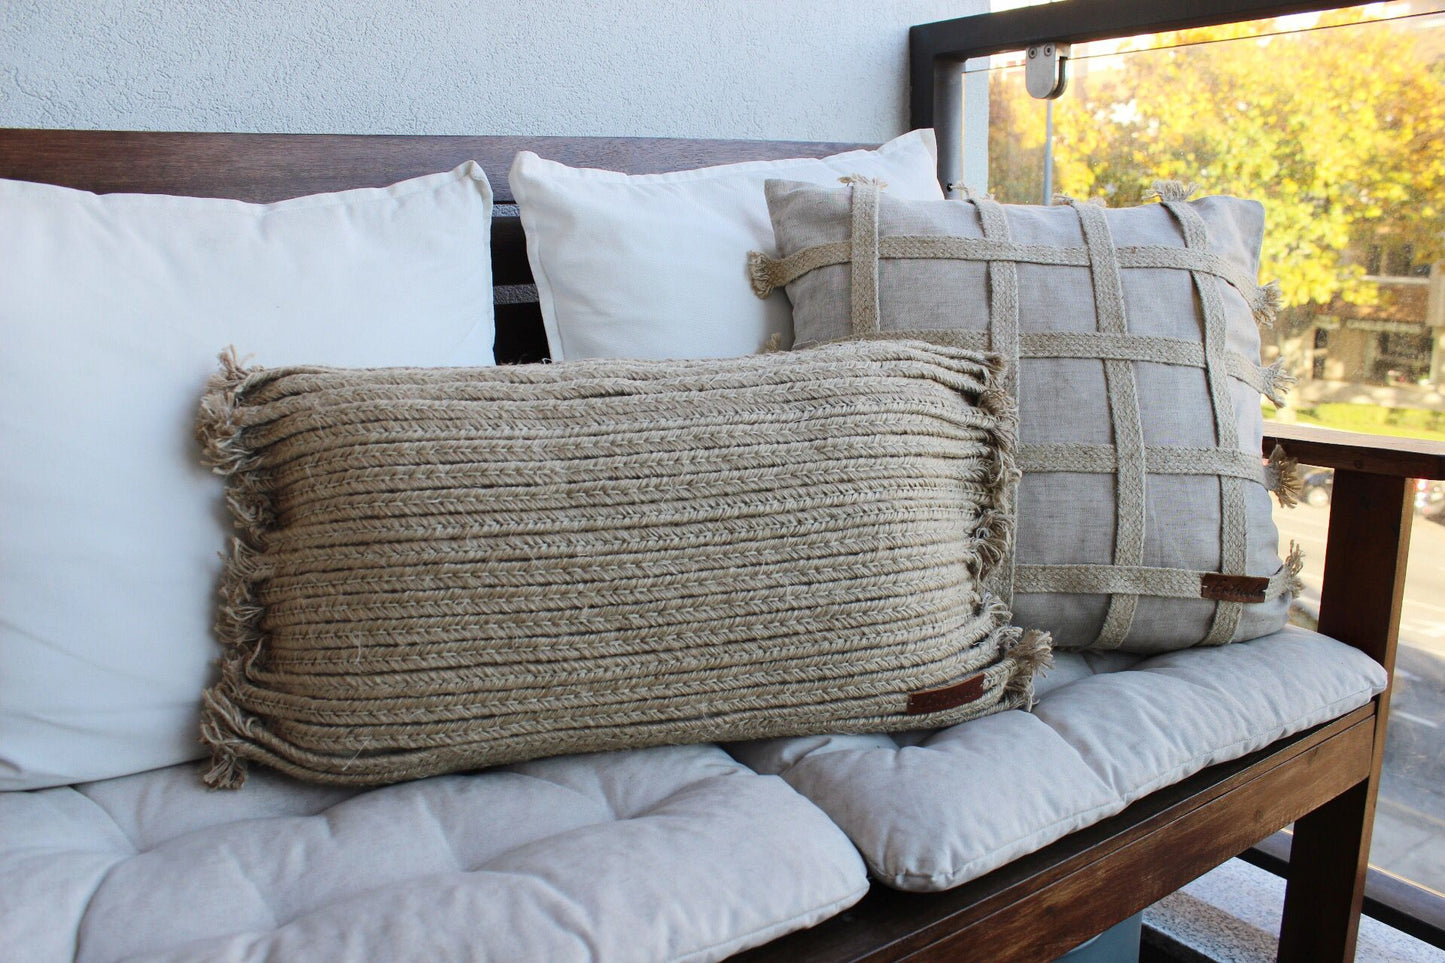 Baçal - cushion with rope